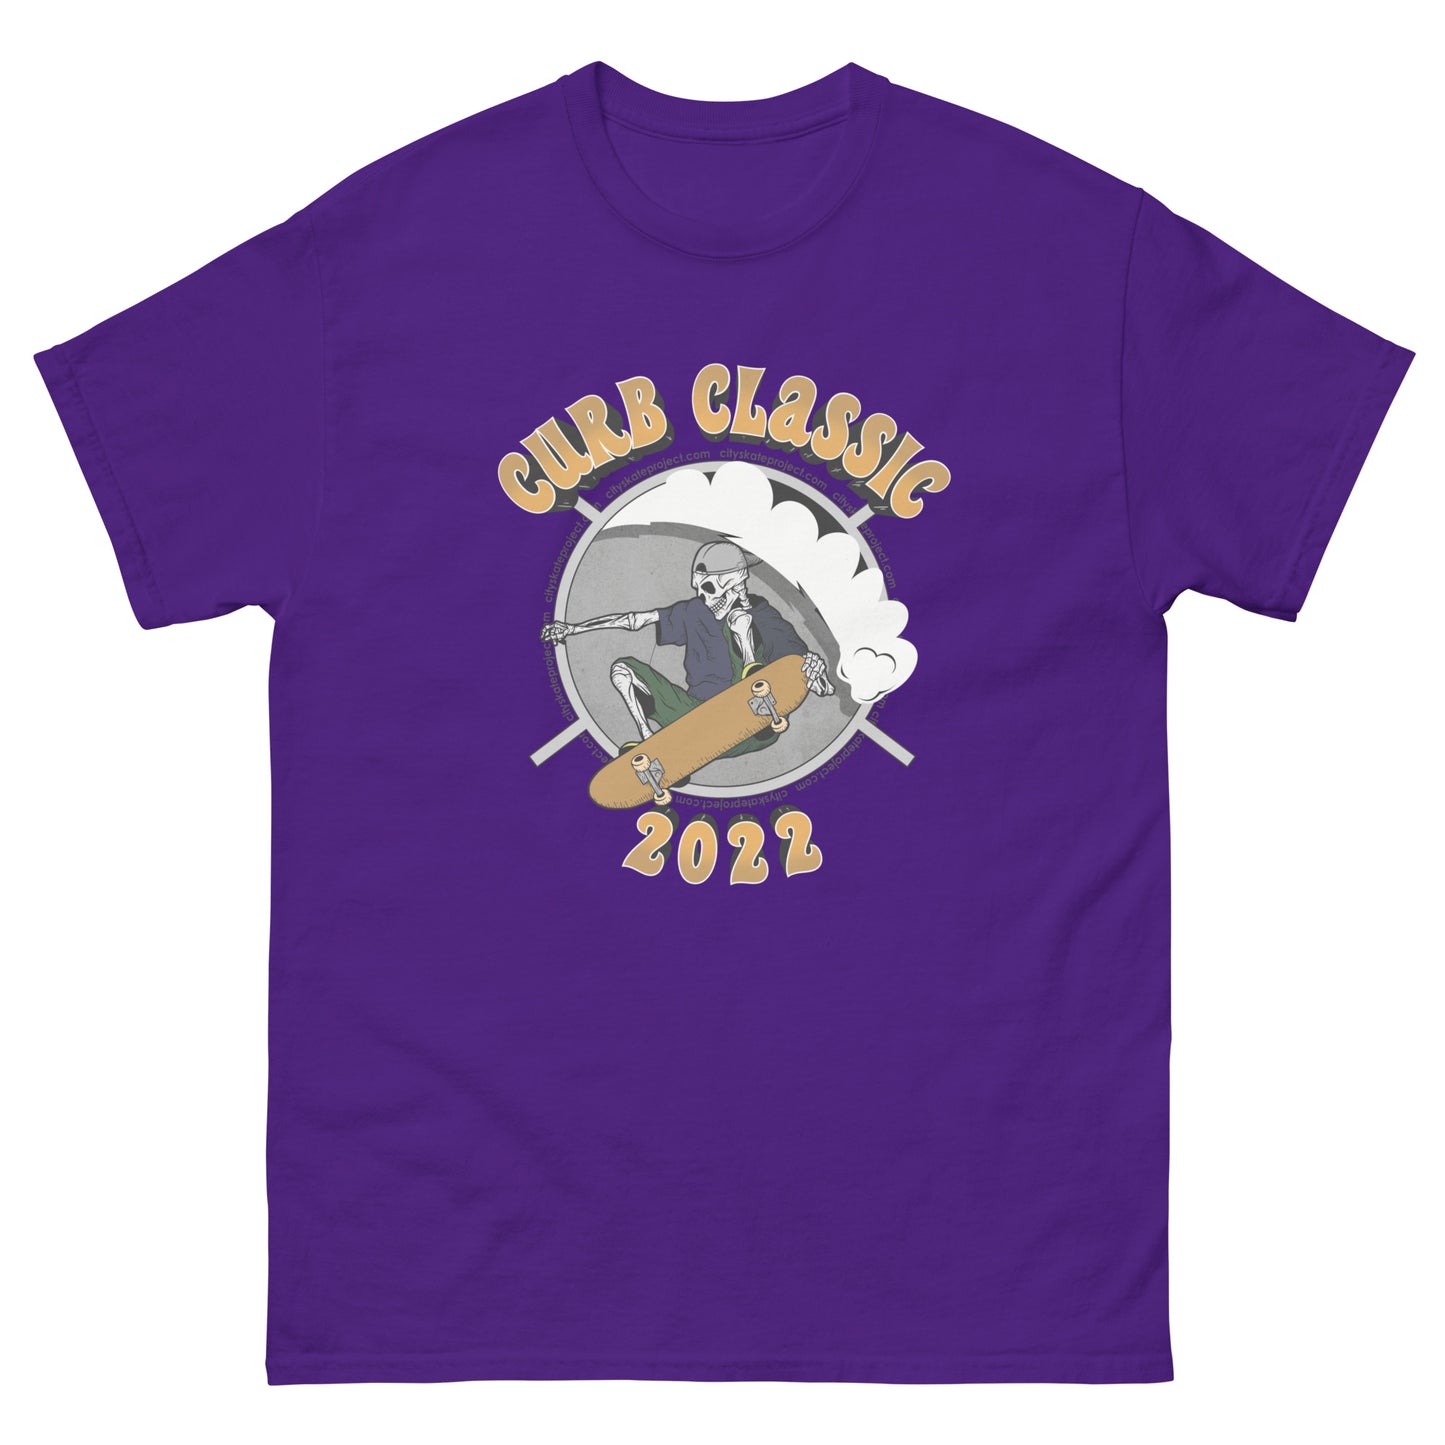 City Skate Project Curb Classic 2022 Event Shirt